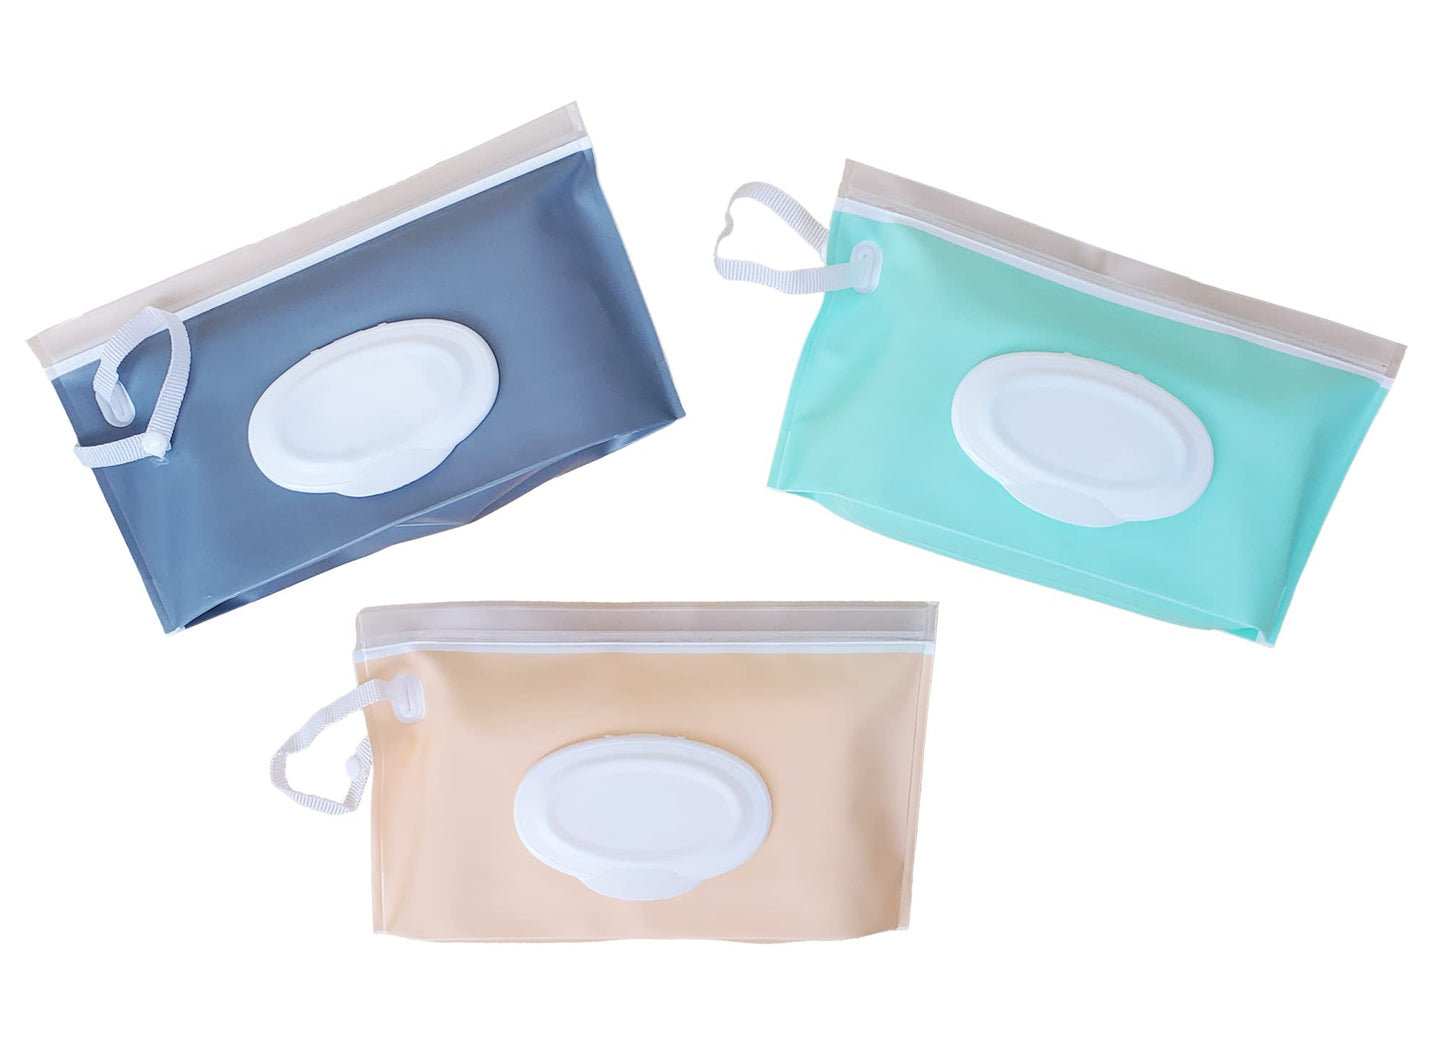 purifyou Baby Wipe Case Travel Holder Set of 3 Wet Wipes Holders Cases